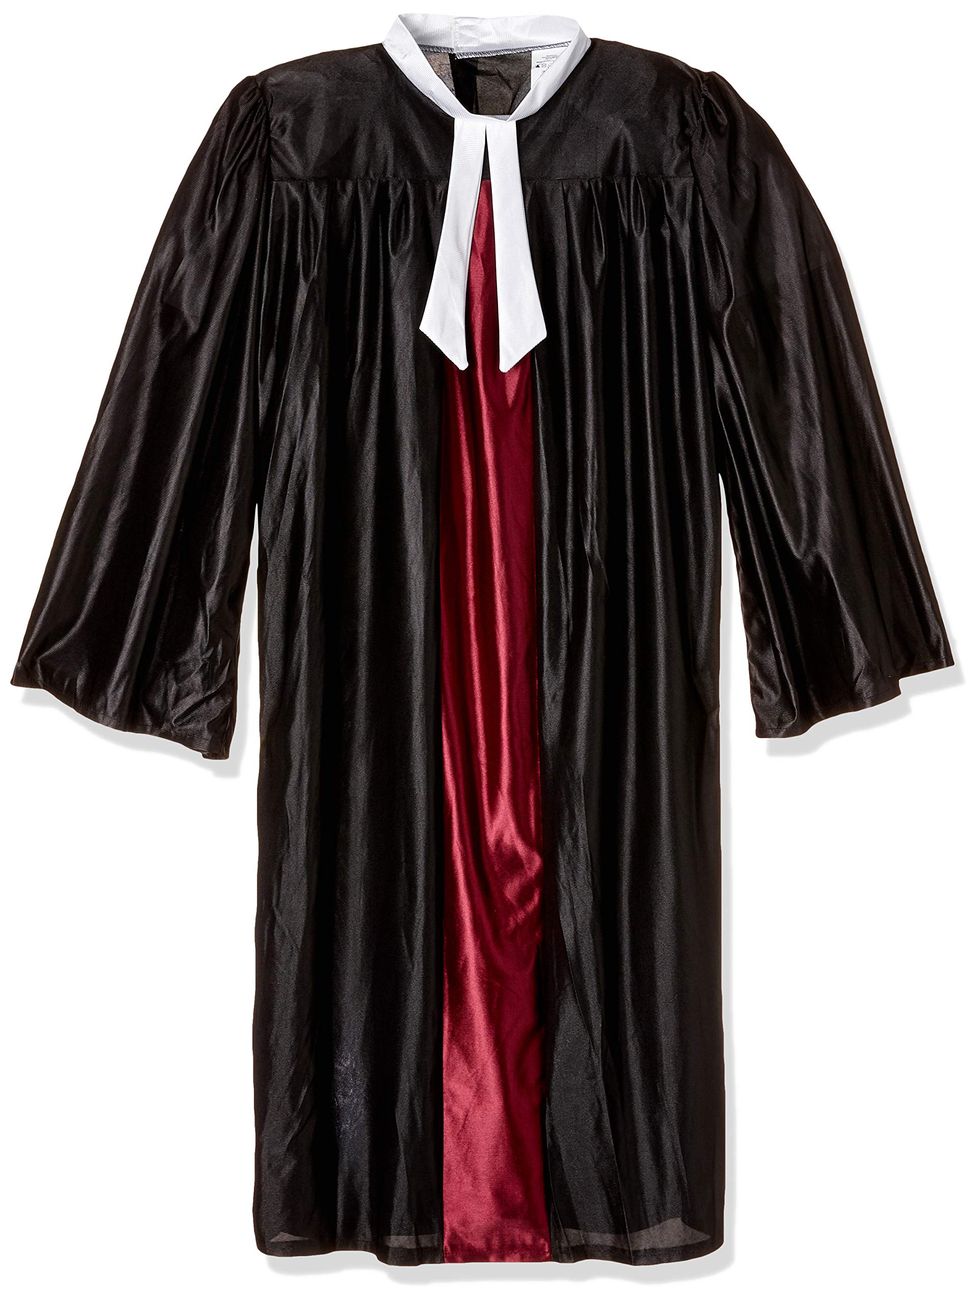 Judge Gown Costume